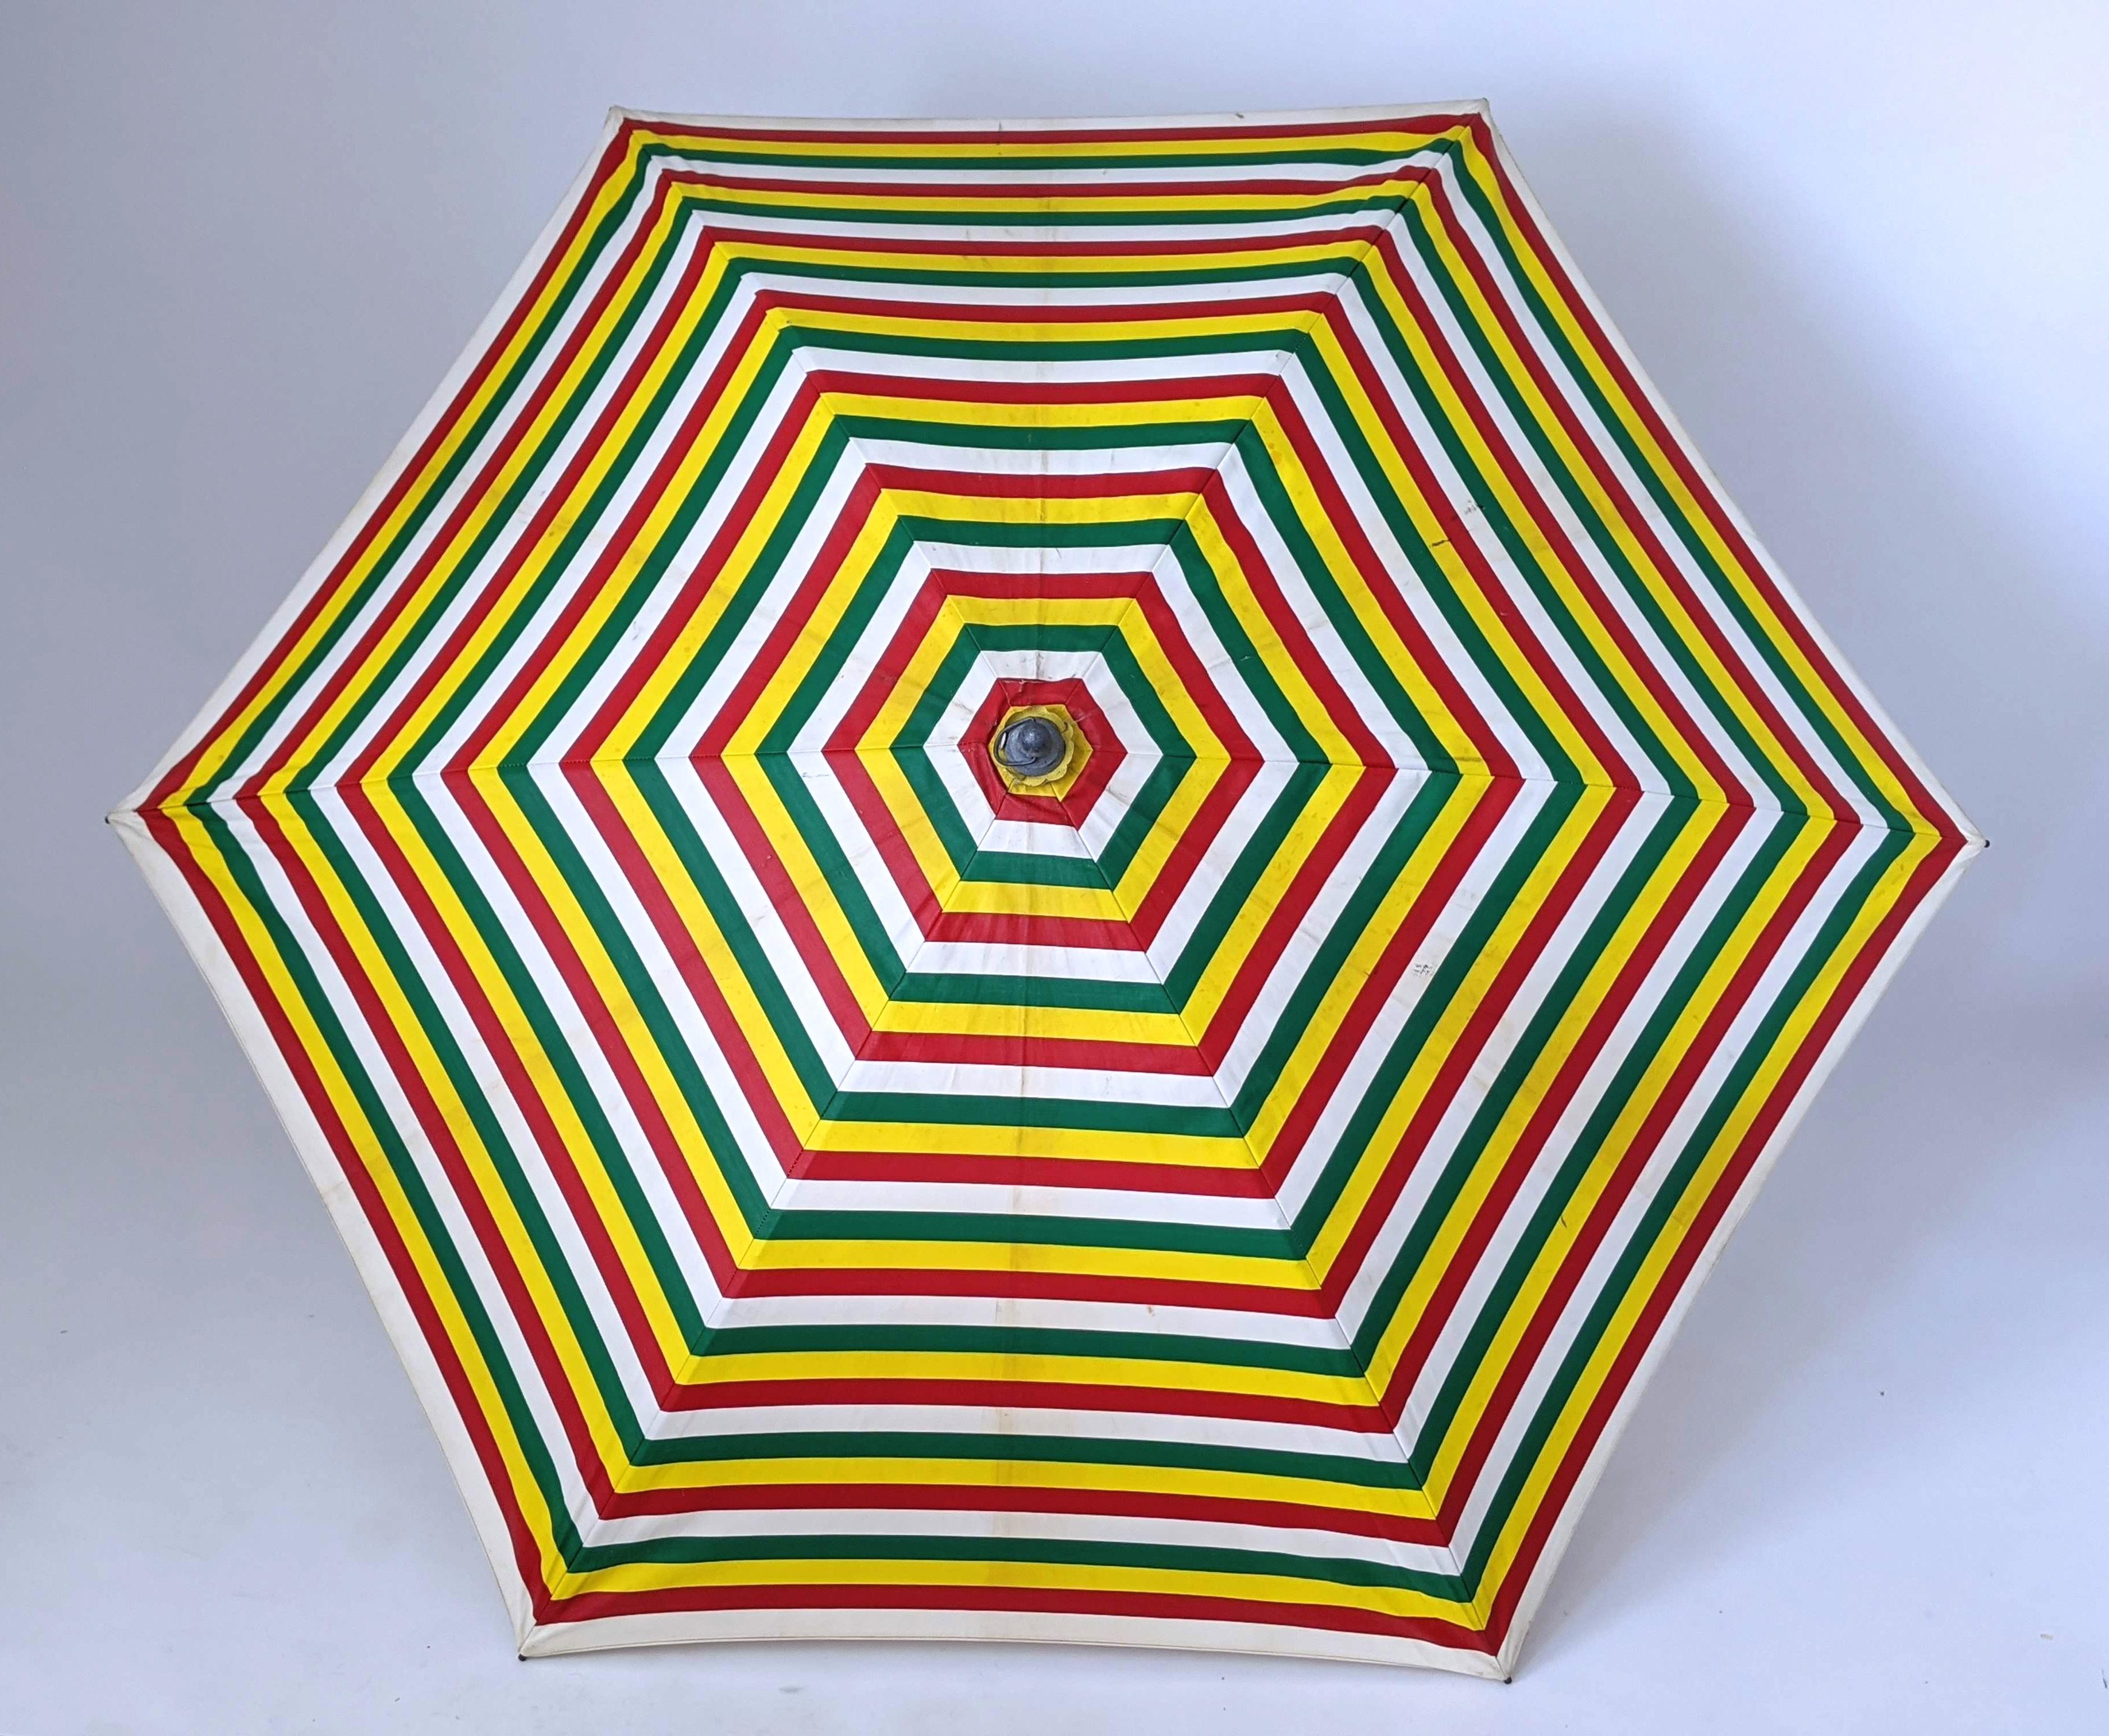 Beach umbrella from the 1950s with vivid and vibrant color in very good condition.

Screen printed with enamel on a thick canvas fabric that is still supple, malleable and waterproof.

Solid sturdy construction. Oak pole with aluminium